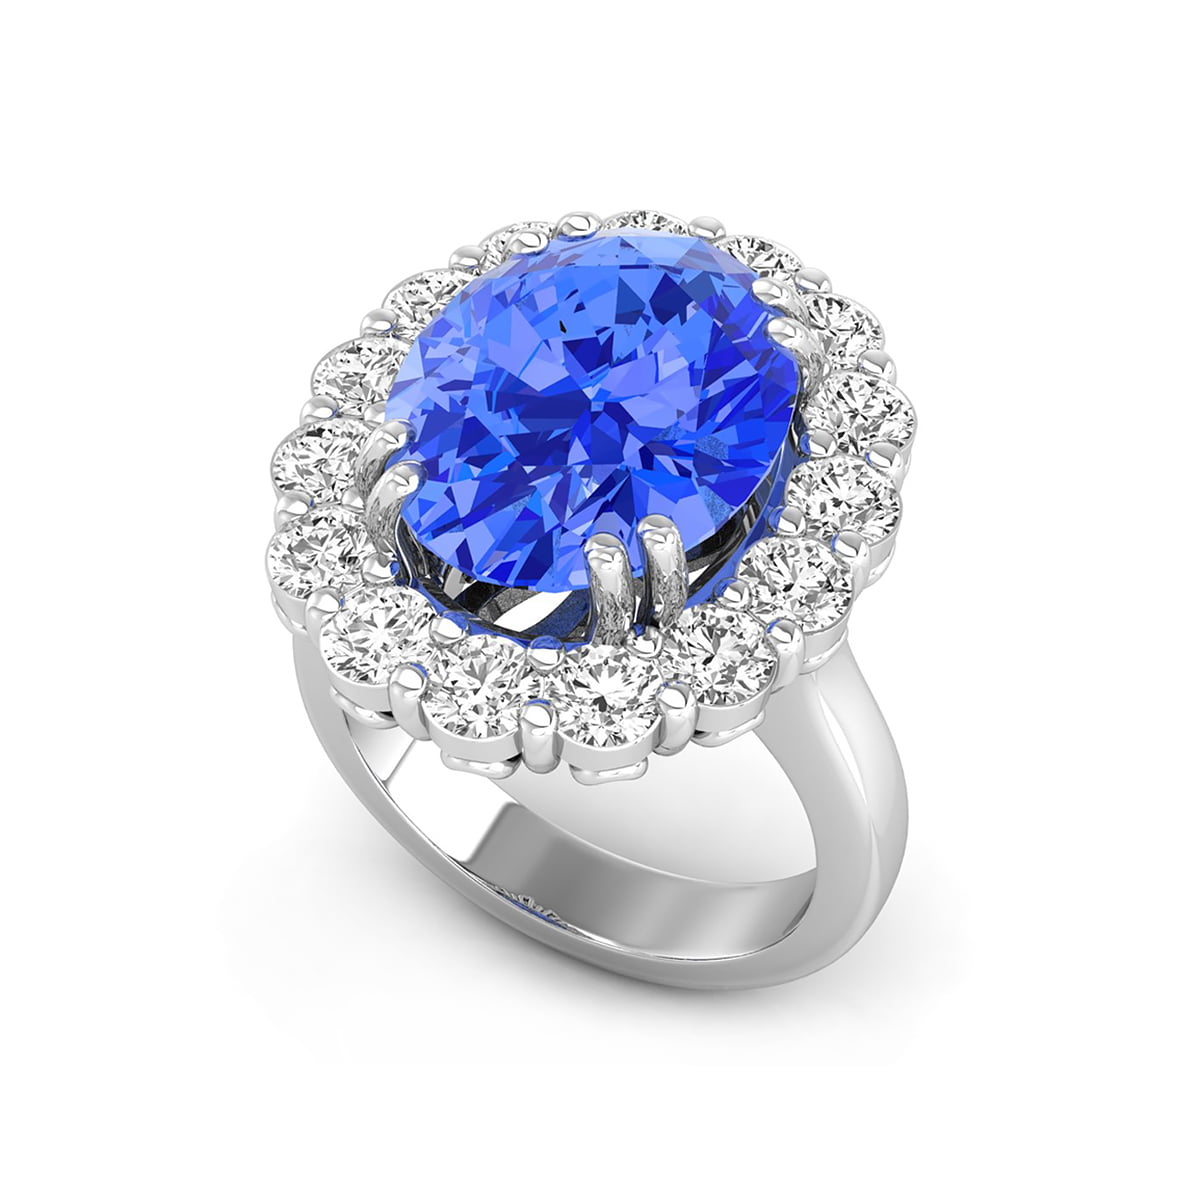 Royal Blue Sapphire Oval Cut With Round White CZ Stone Floral Motif Halo Engagement Ring